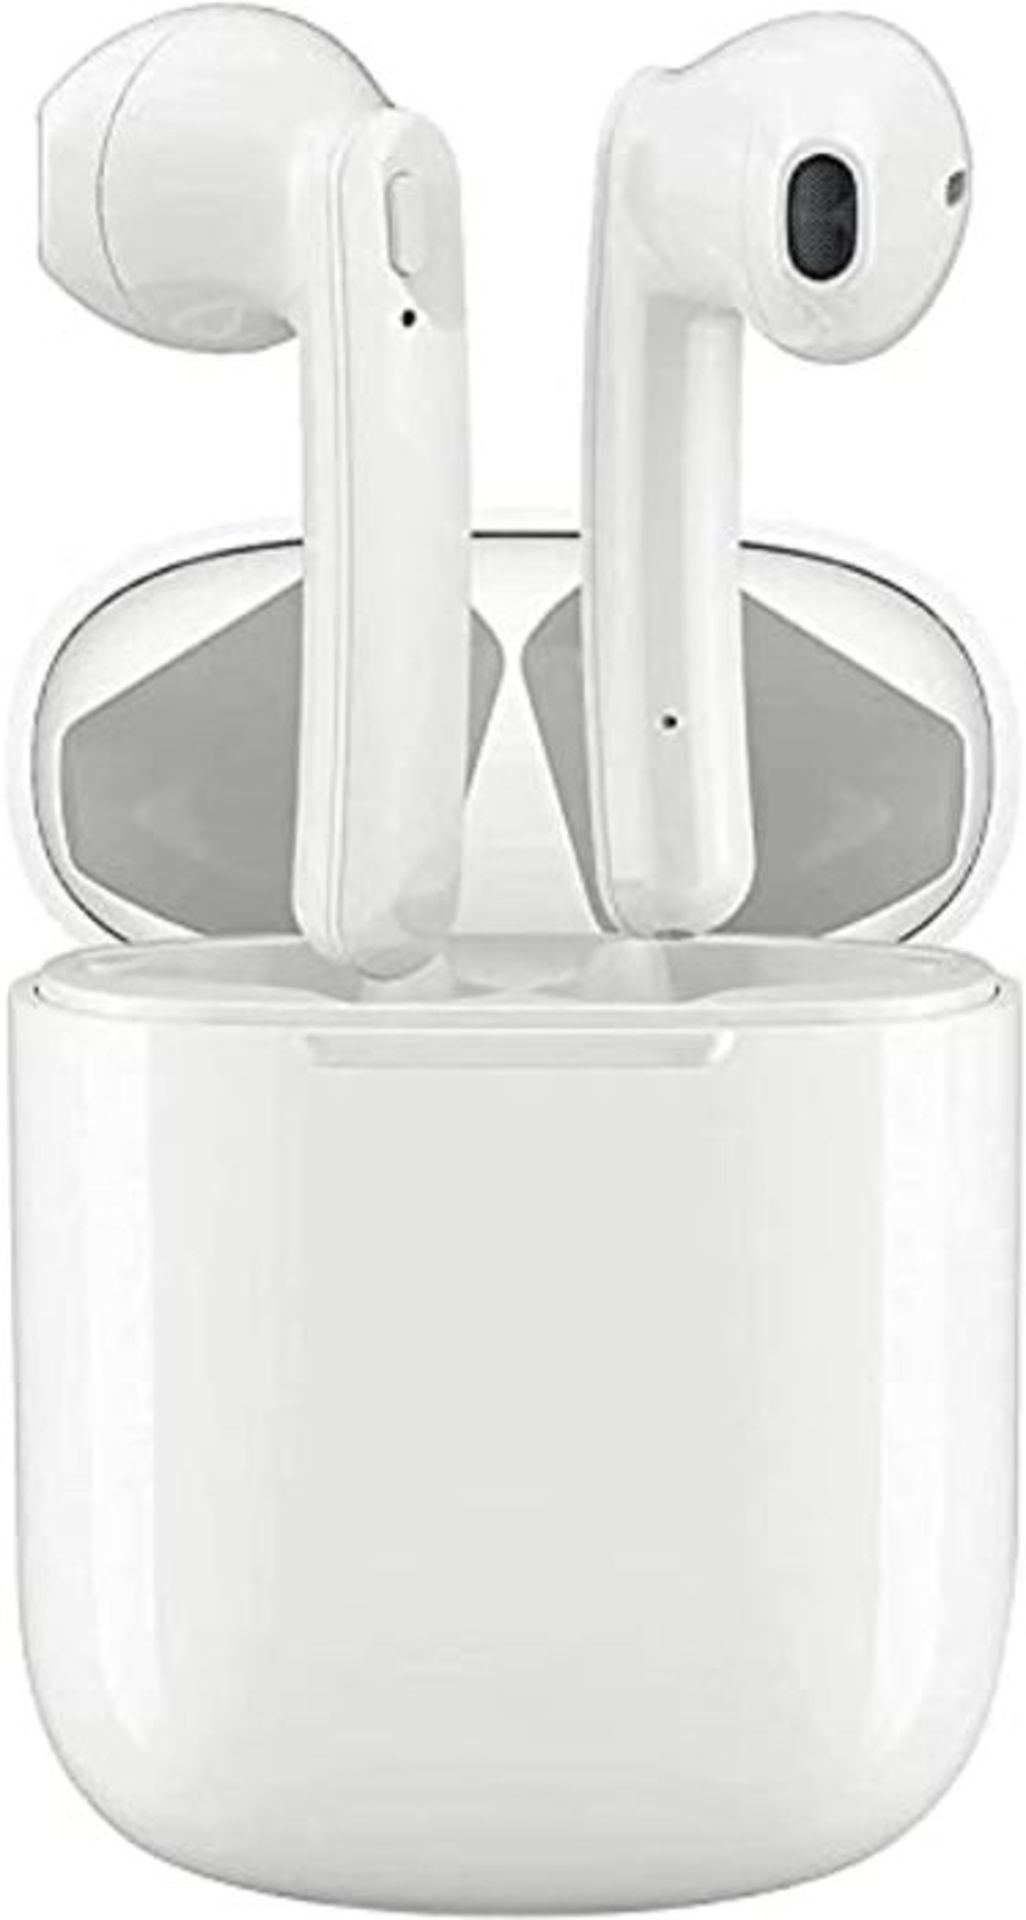 [CRACKED] Wireless Bluetooth Earphones with Noise Reduction, Bluetooth 5.0 Sports Earp - Image 4 of 6